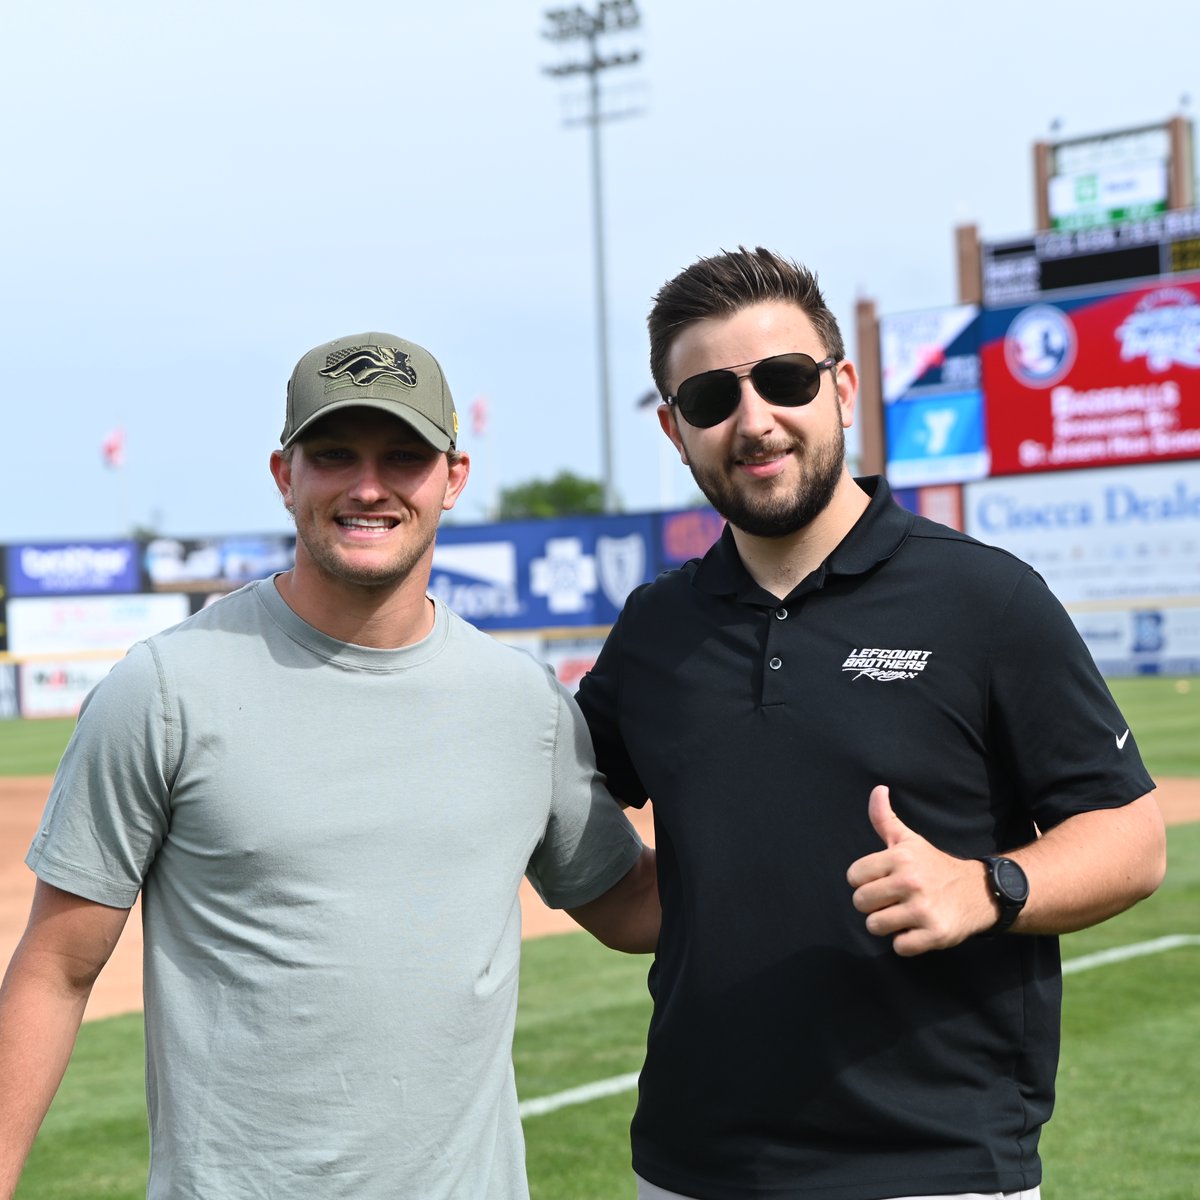 Zoom over to TD Bank Ballpark this Thursday, May 2nd to meet @NASCAR_Xfinity drivers @SageKaram and @Joegrafjr for Racing Night in Somerset!🏁 🏎 | bit.ly/4a2bkTZ